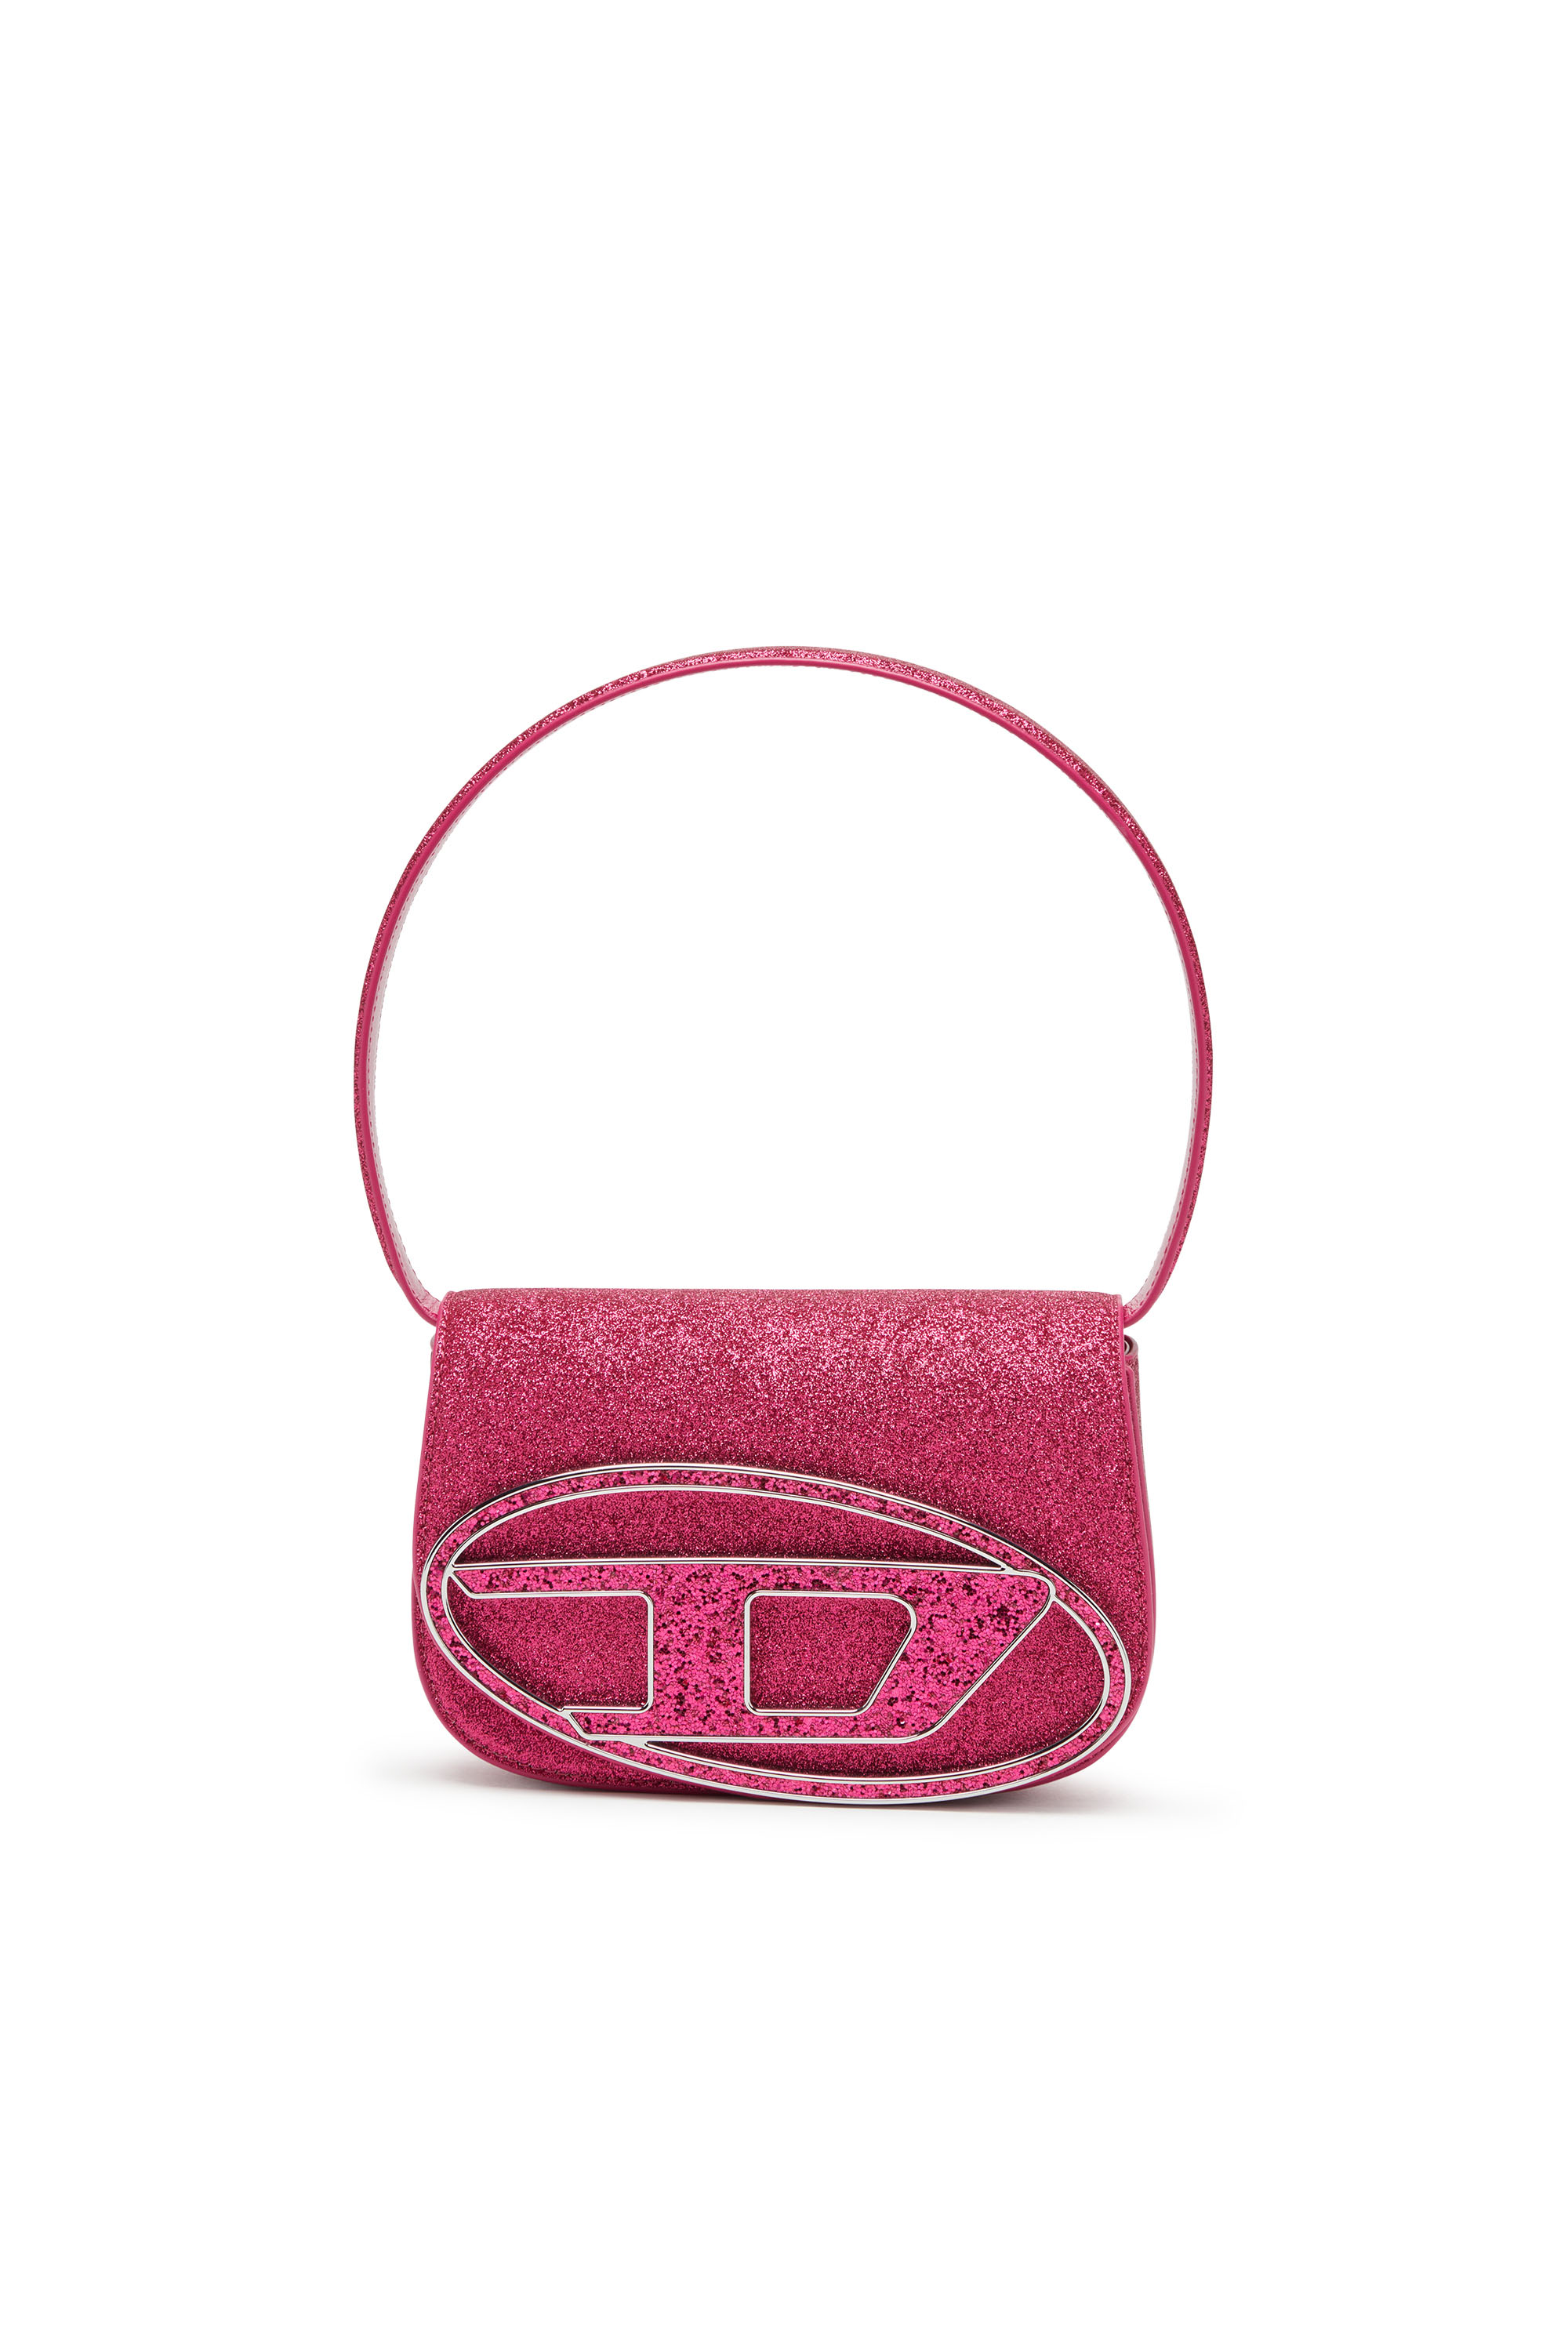 Diesel - 1DR, Woman 1DR-Iconic shoulder bag in glitter fabric in Pink - Image 1